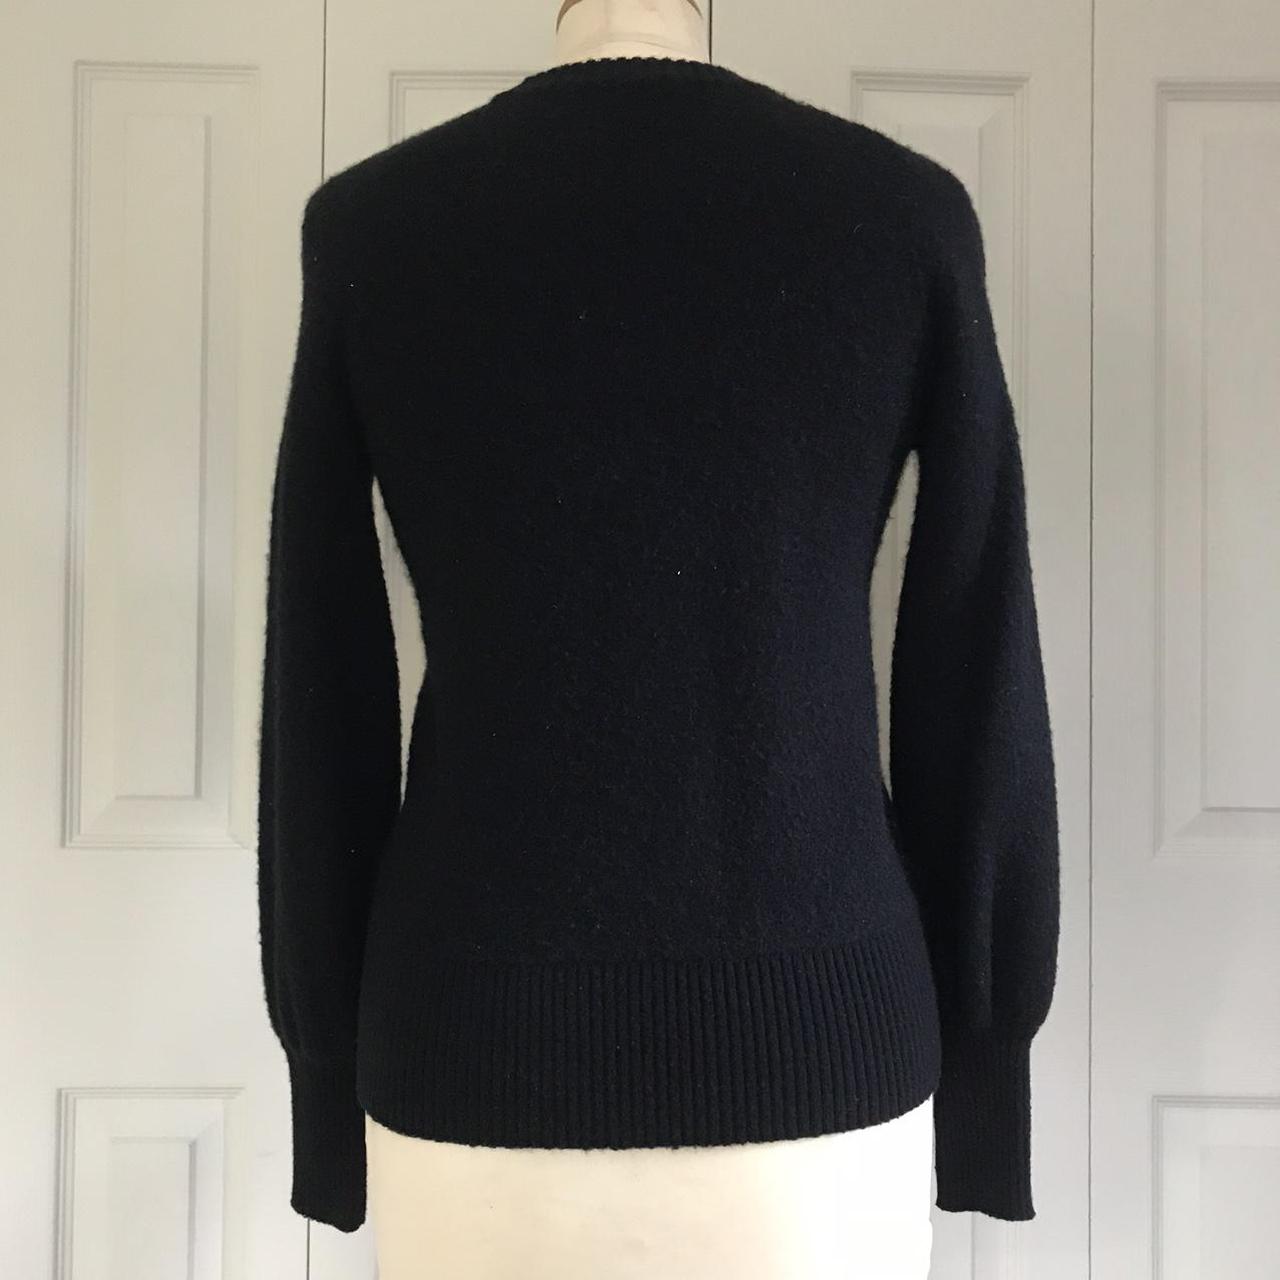 Product Image 3 - THE LIMITED CASHMERE SWEATER. Size